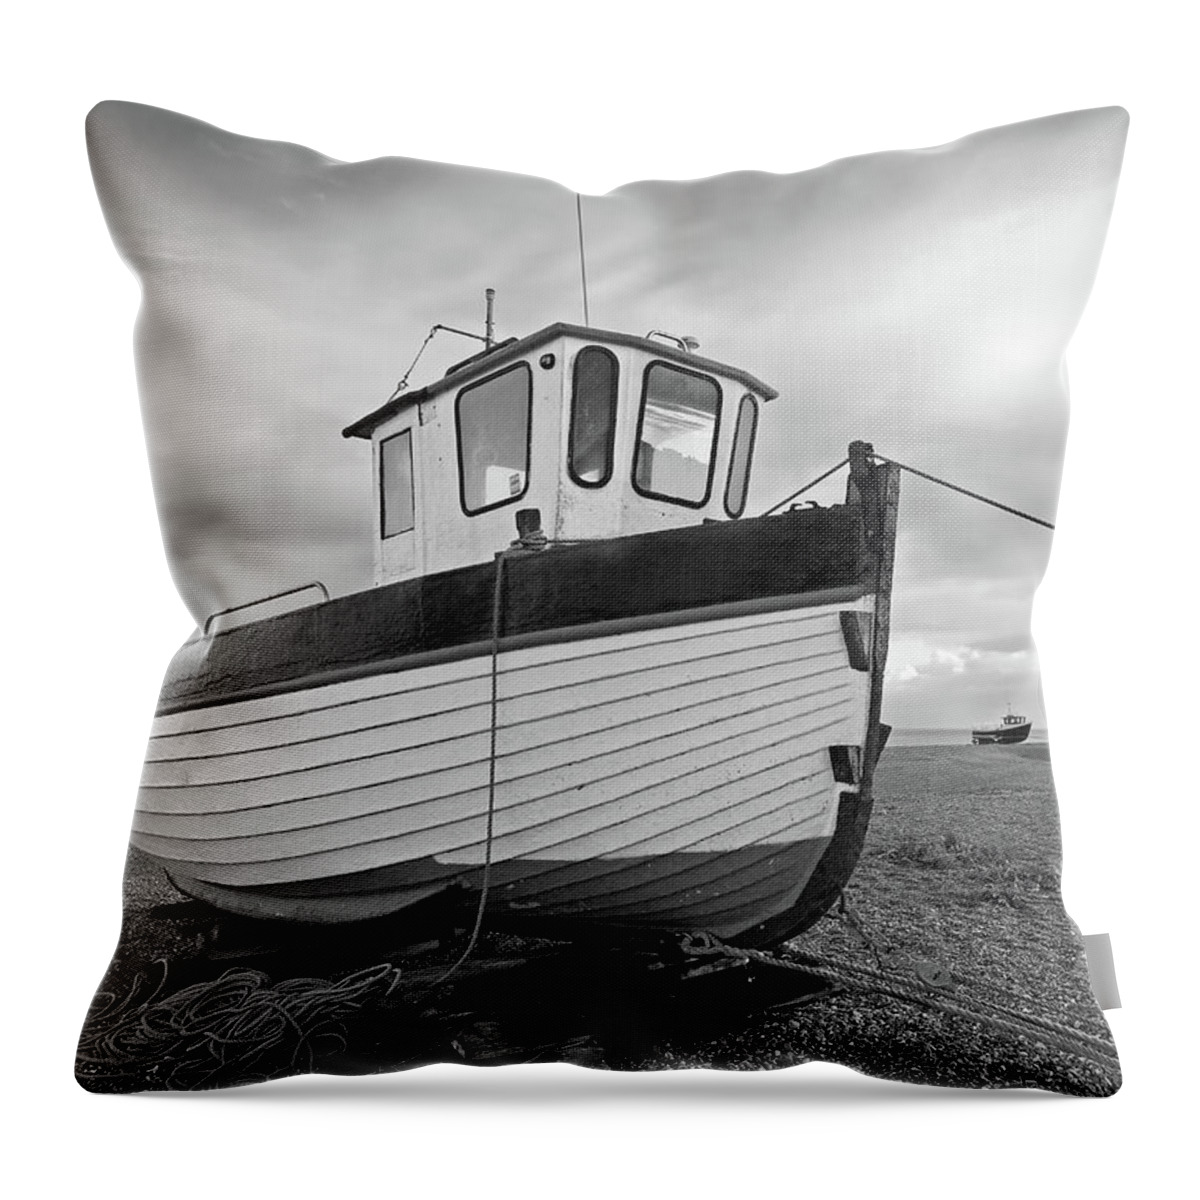 Old Fishing Boat Throw Pillow featuring the photograph Old Wooden Fishing Boat in Black and White by Gill Billington